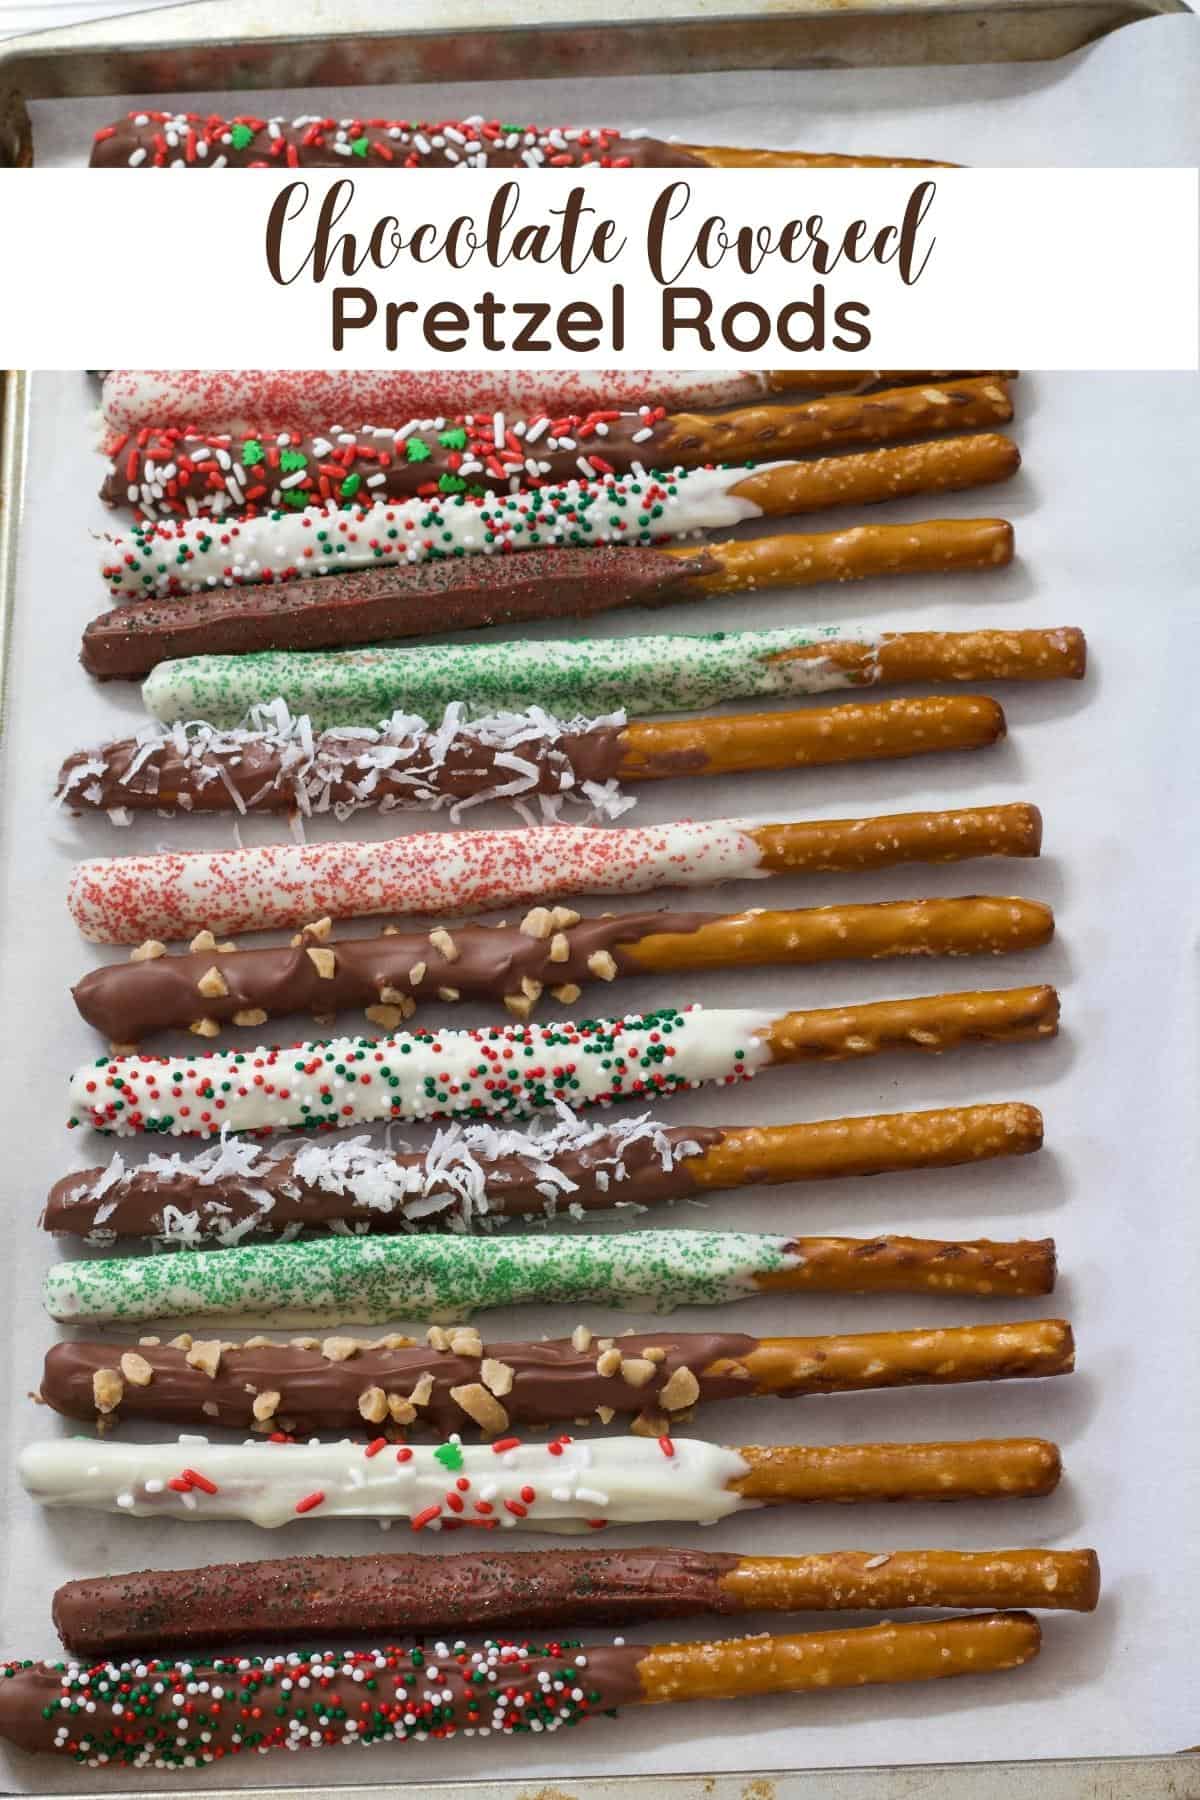 Many pretzel rods that have been dipped in chocolate and have sprinkles on them, the sprinkles are red and green for Christmas.